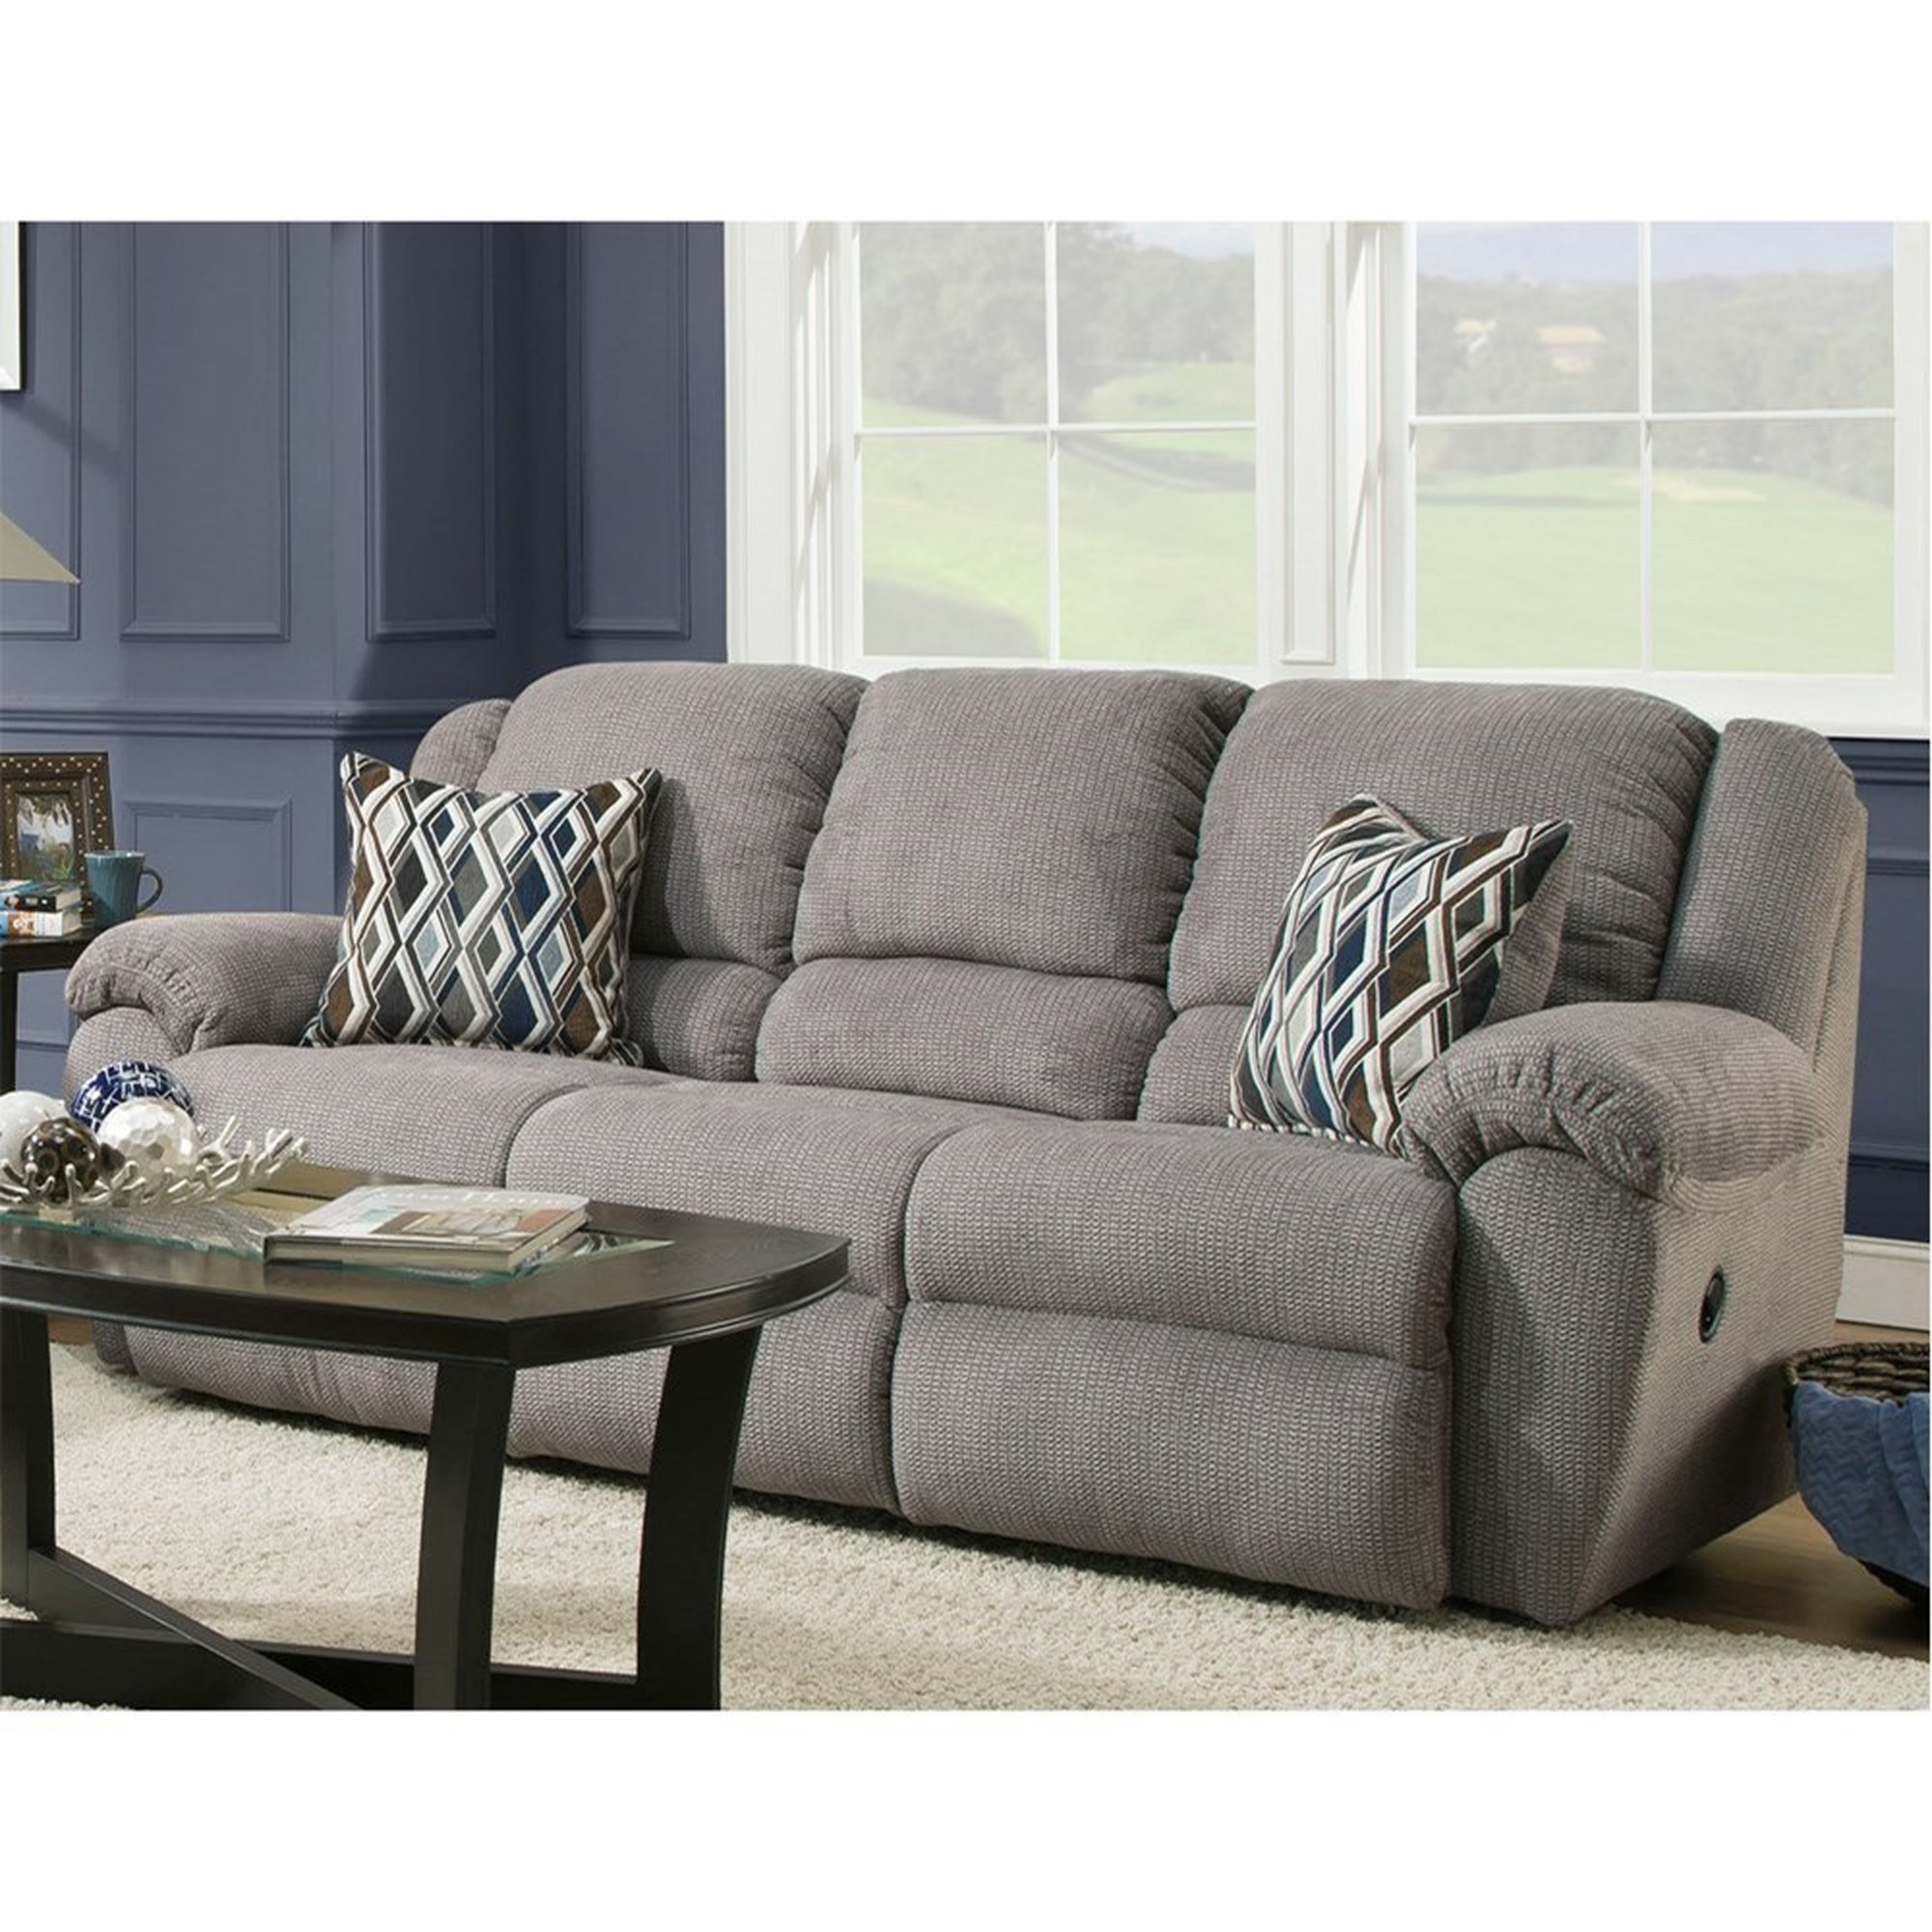 Reclining Sofas - Home Zone Furniture - Furniture Stores serving